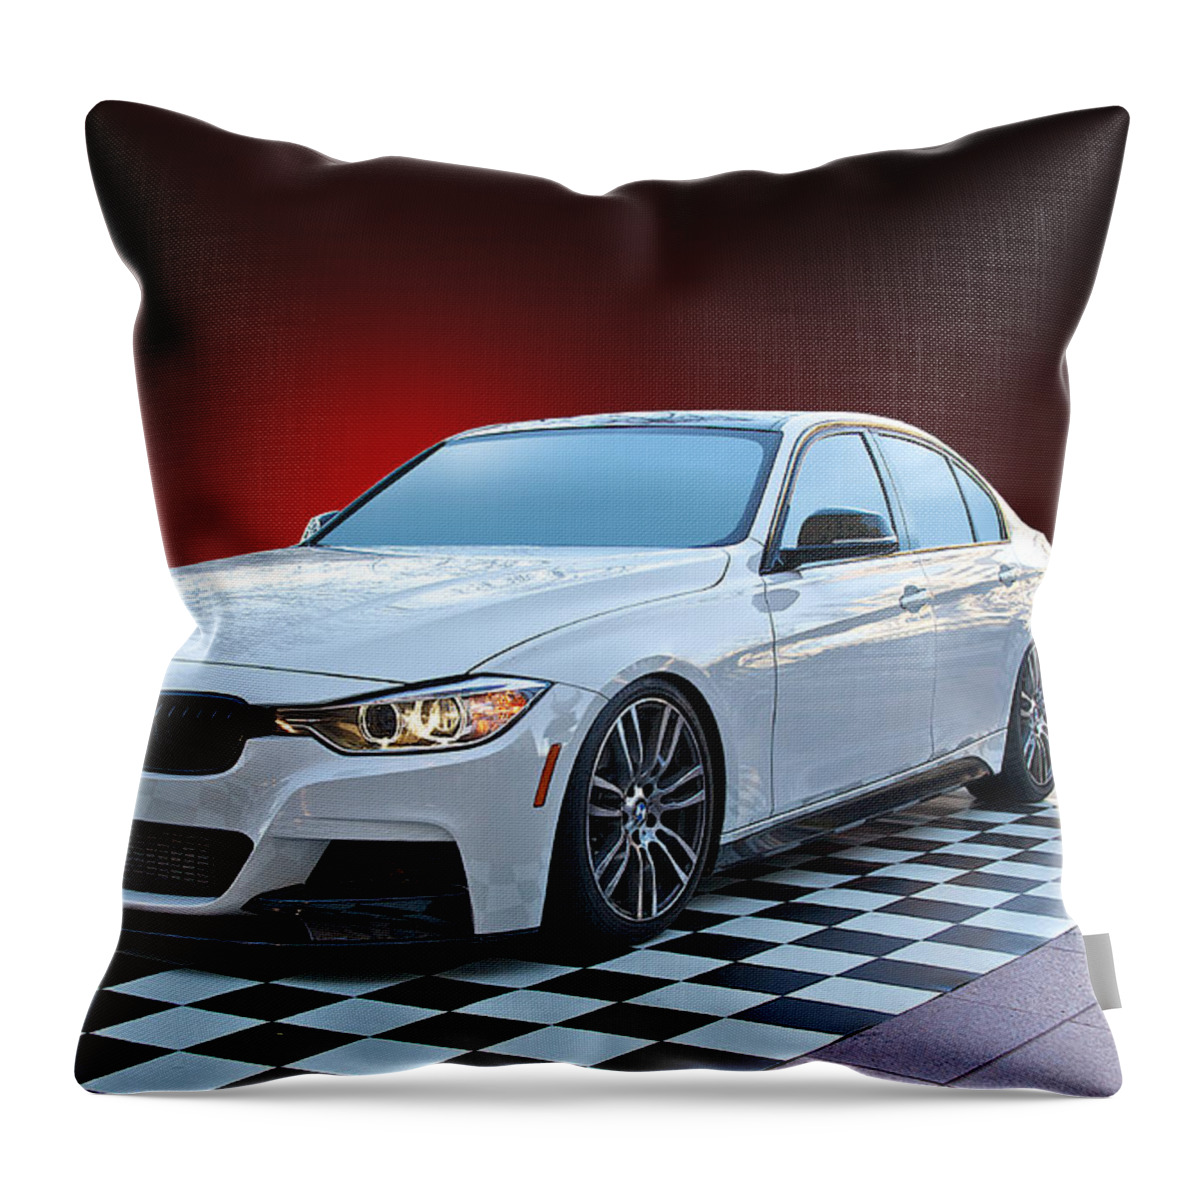 Auto Throw Pillow featuring the photograph 2013 BMW 5 Series Sedan by Dave Koontz